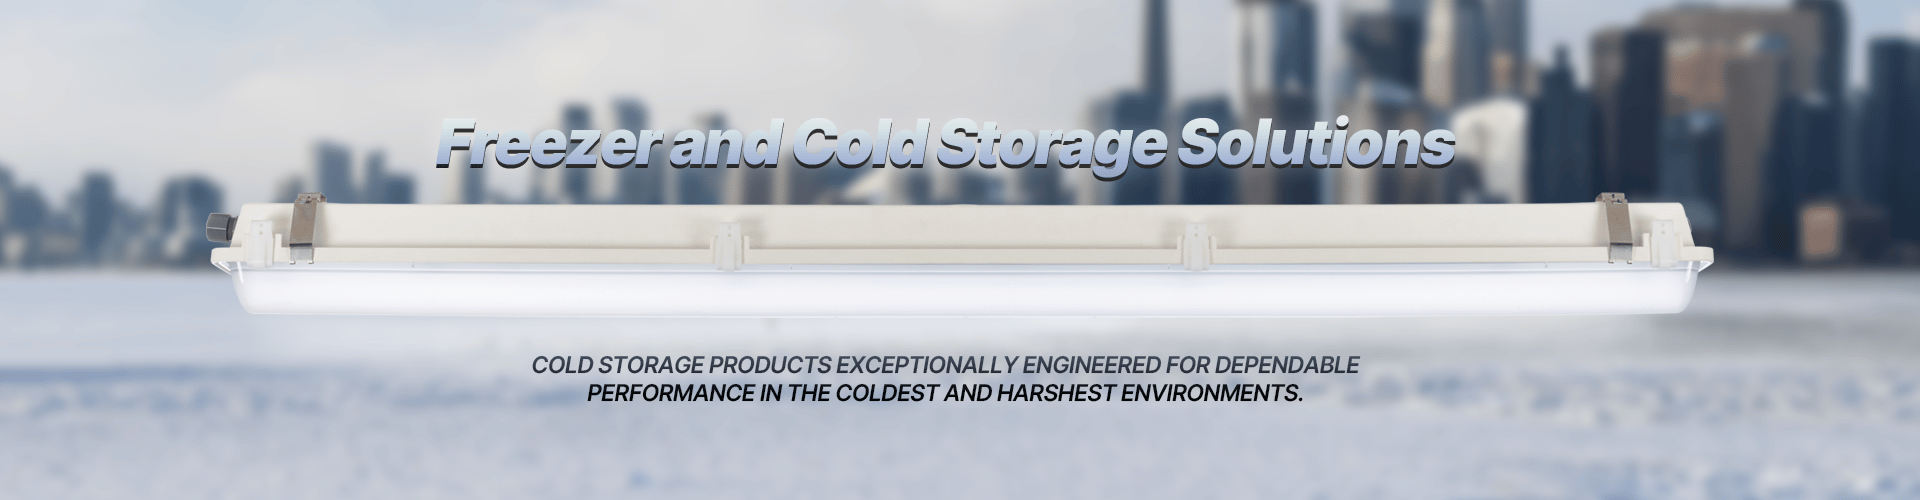 cold storage products exceptionally designed for dependable performance in the coldest and harshest environments